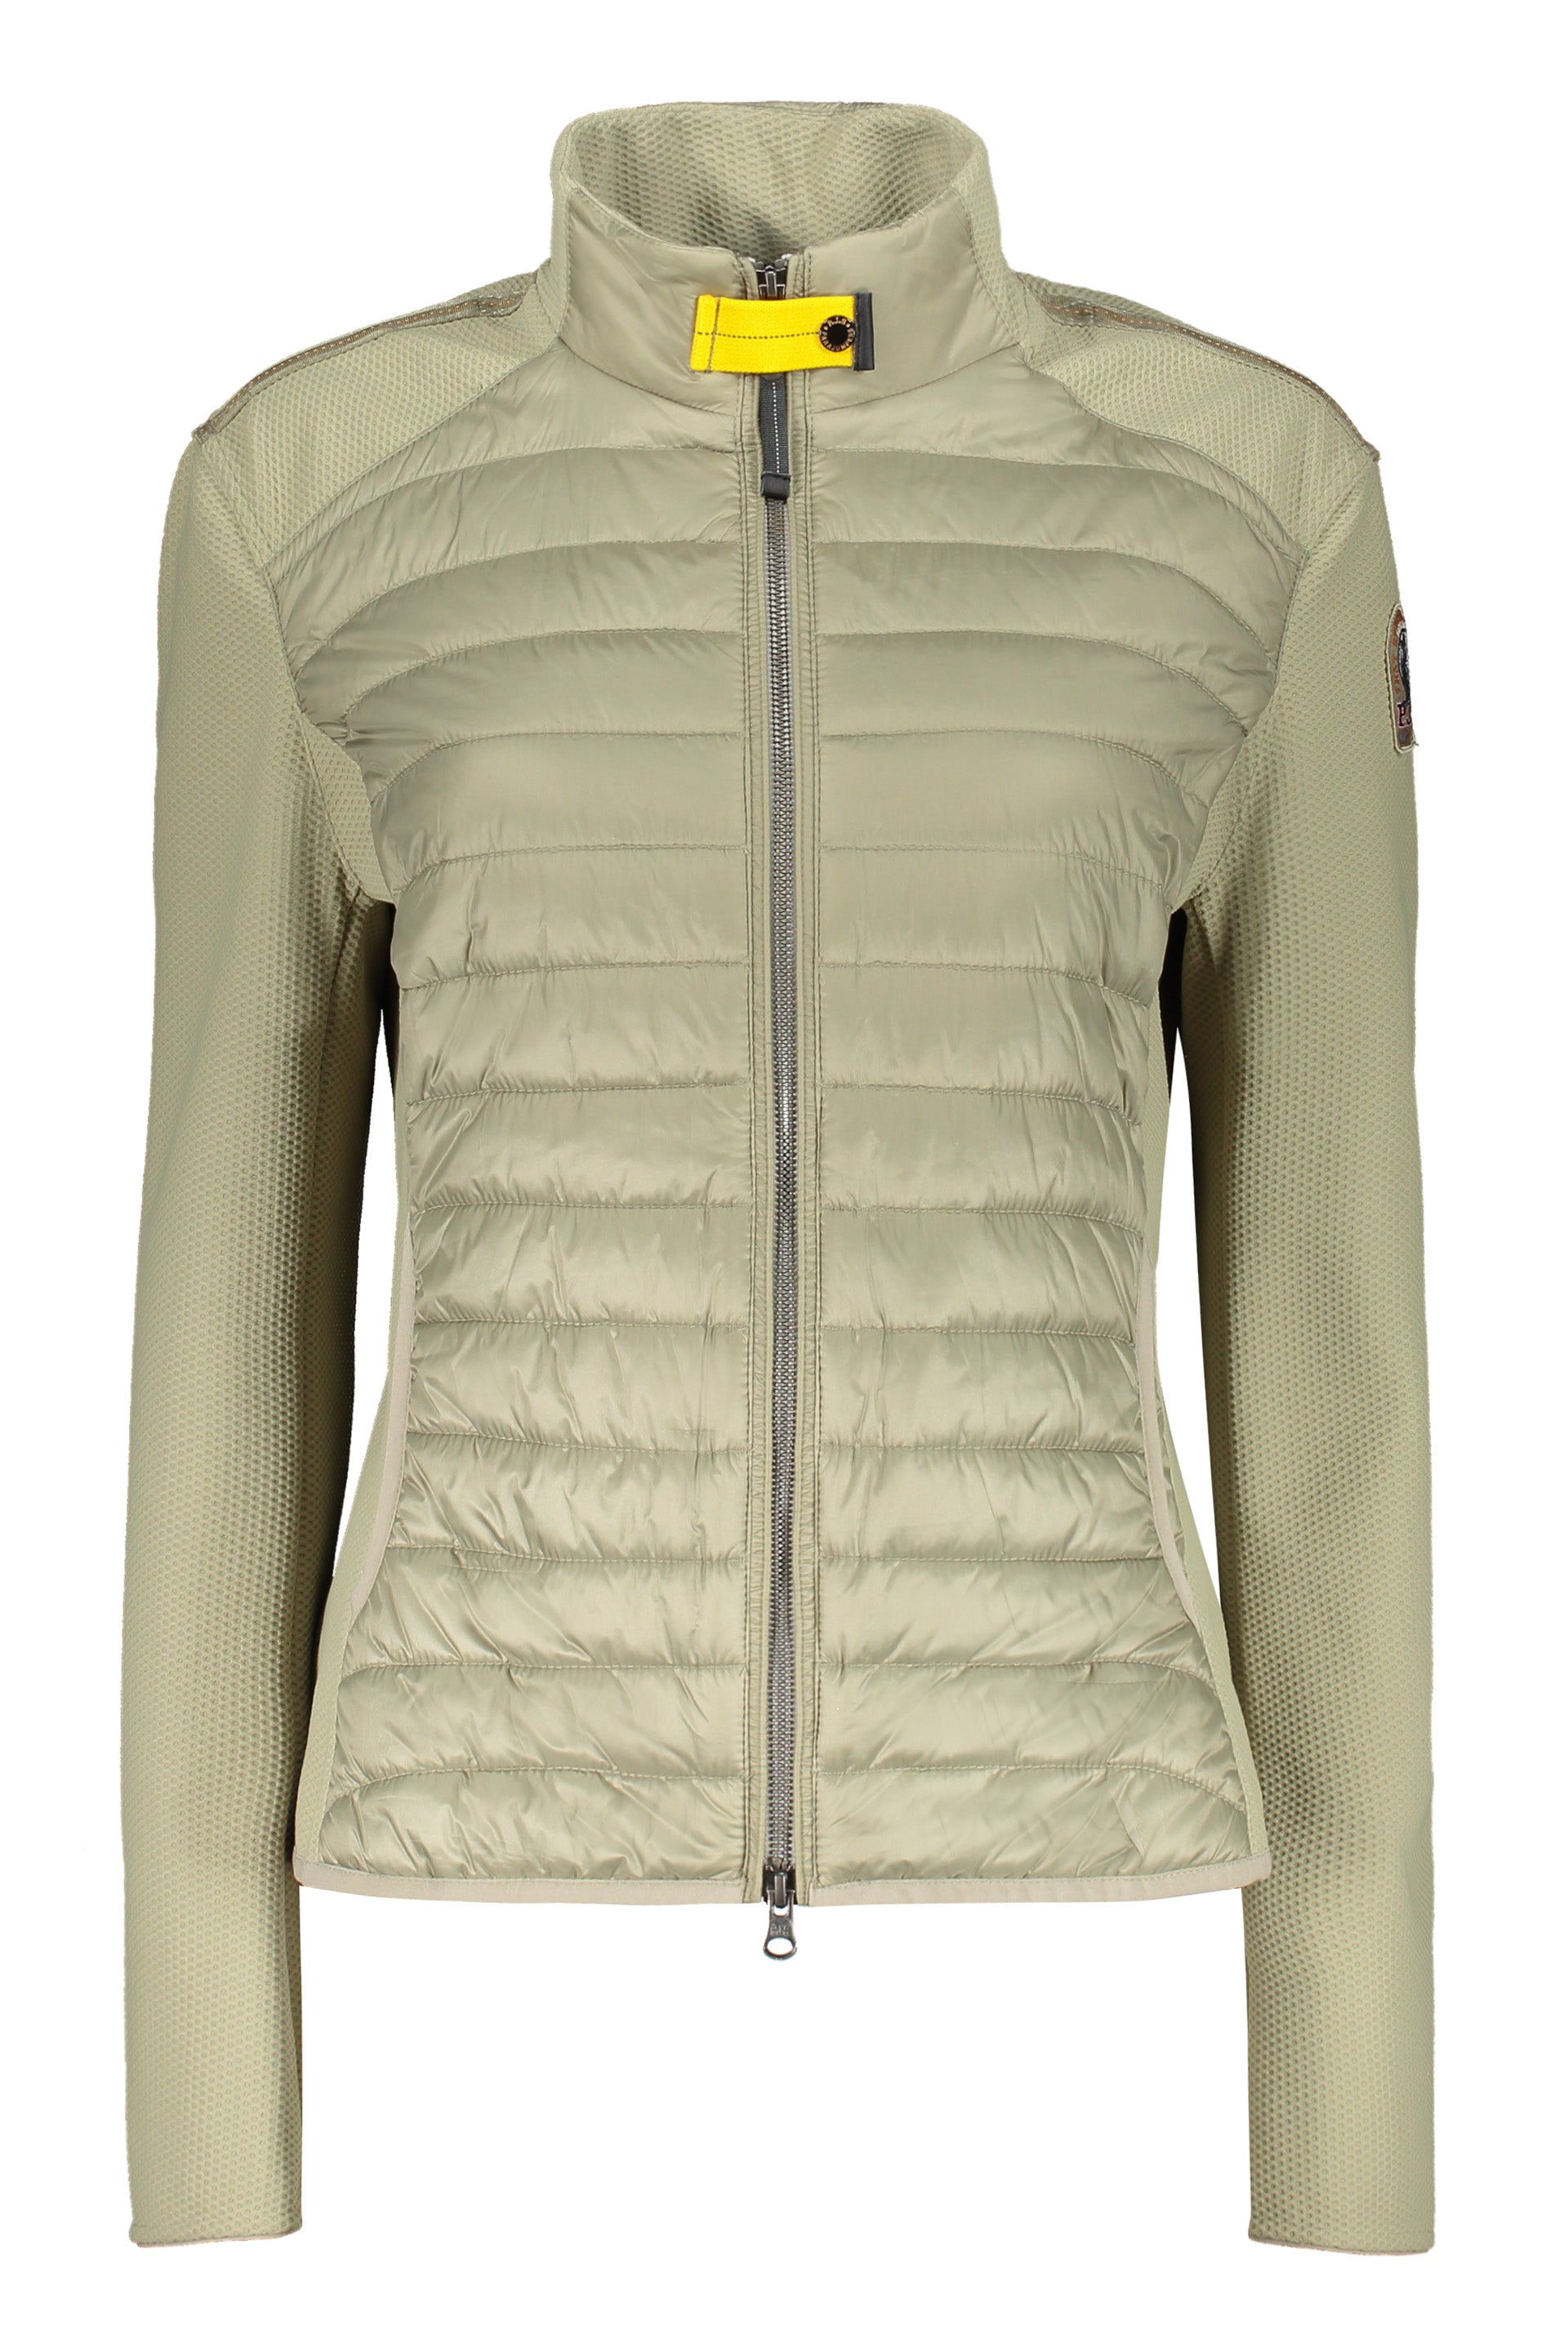 Parajumpers-OUTLET-SALE-Olivia-techno-fabric-padded-jacket-Jacken-Mantel-L-ARCHIVE-COLLECTION.jpg